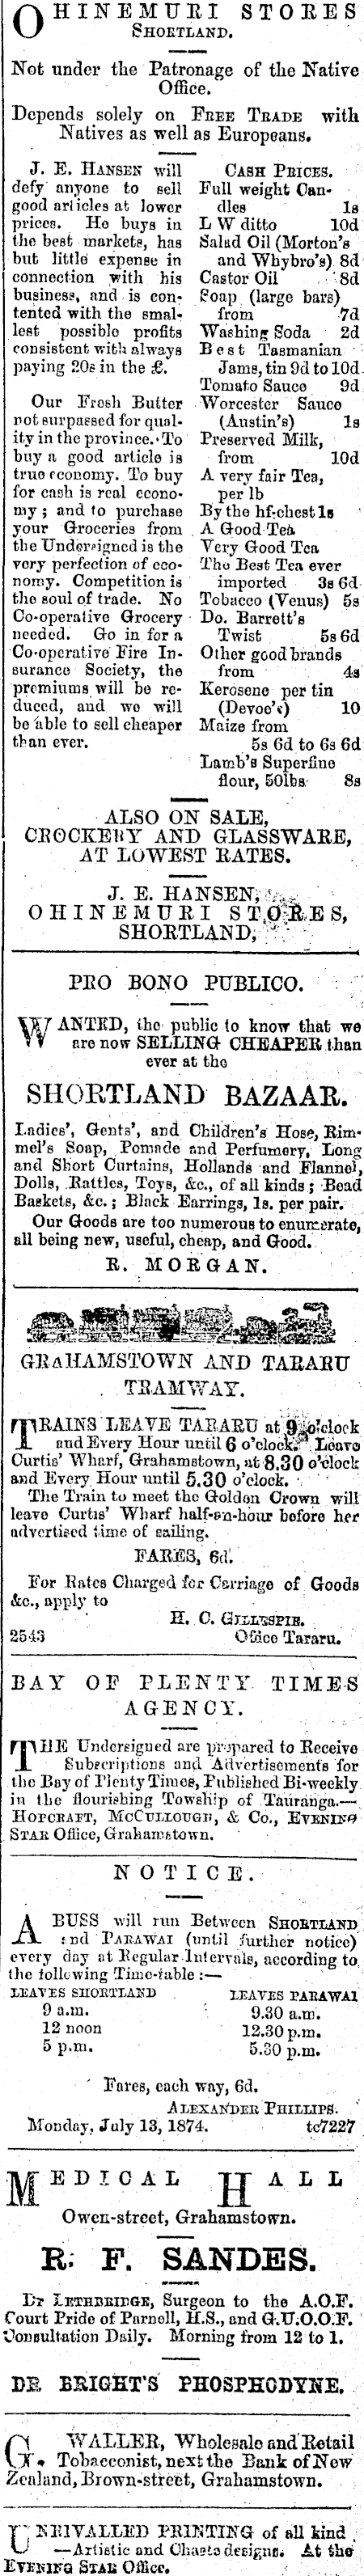 Papers Past Newspapers Thames Star 9 November 1874 Page 1 Advertisements Column 6